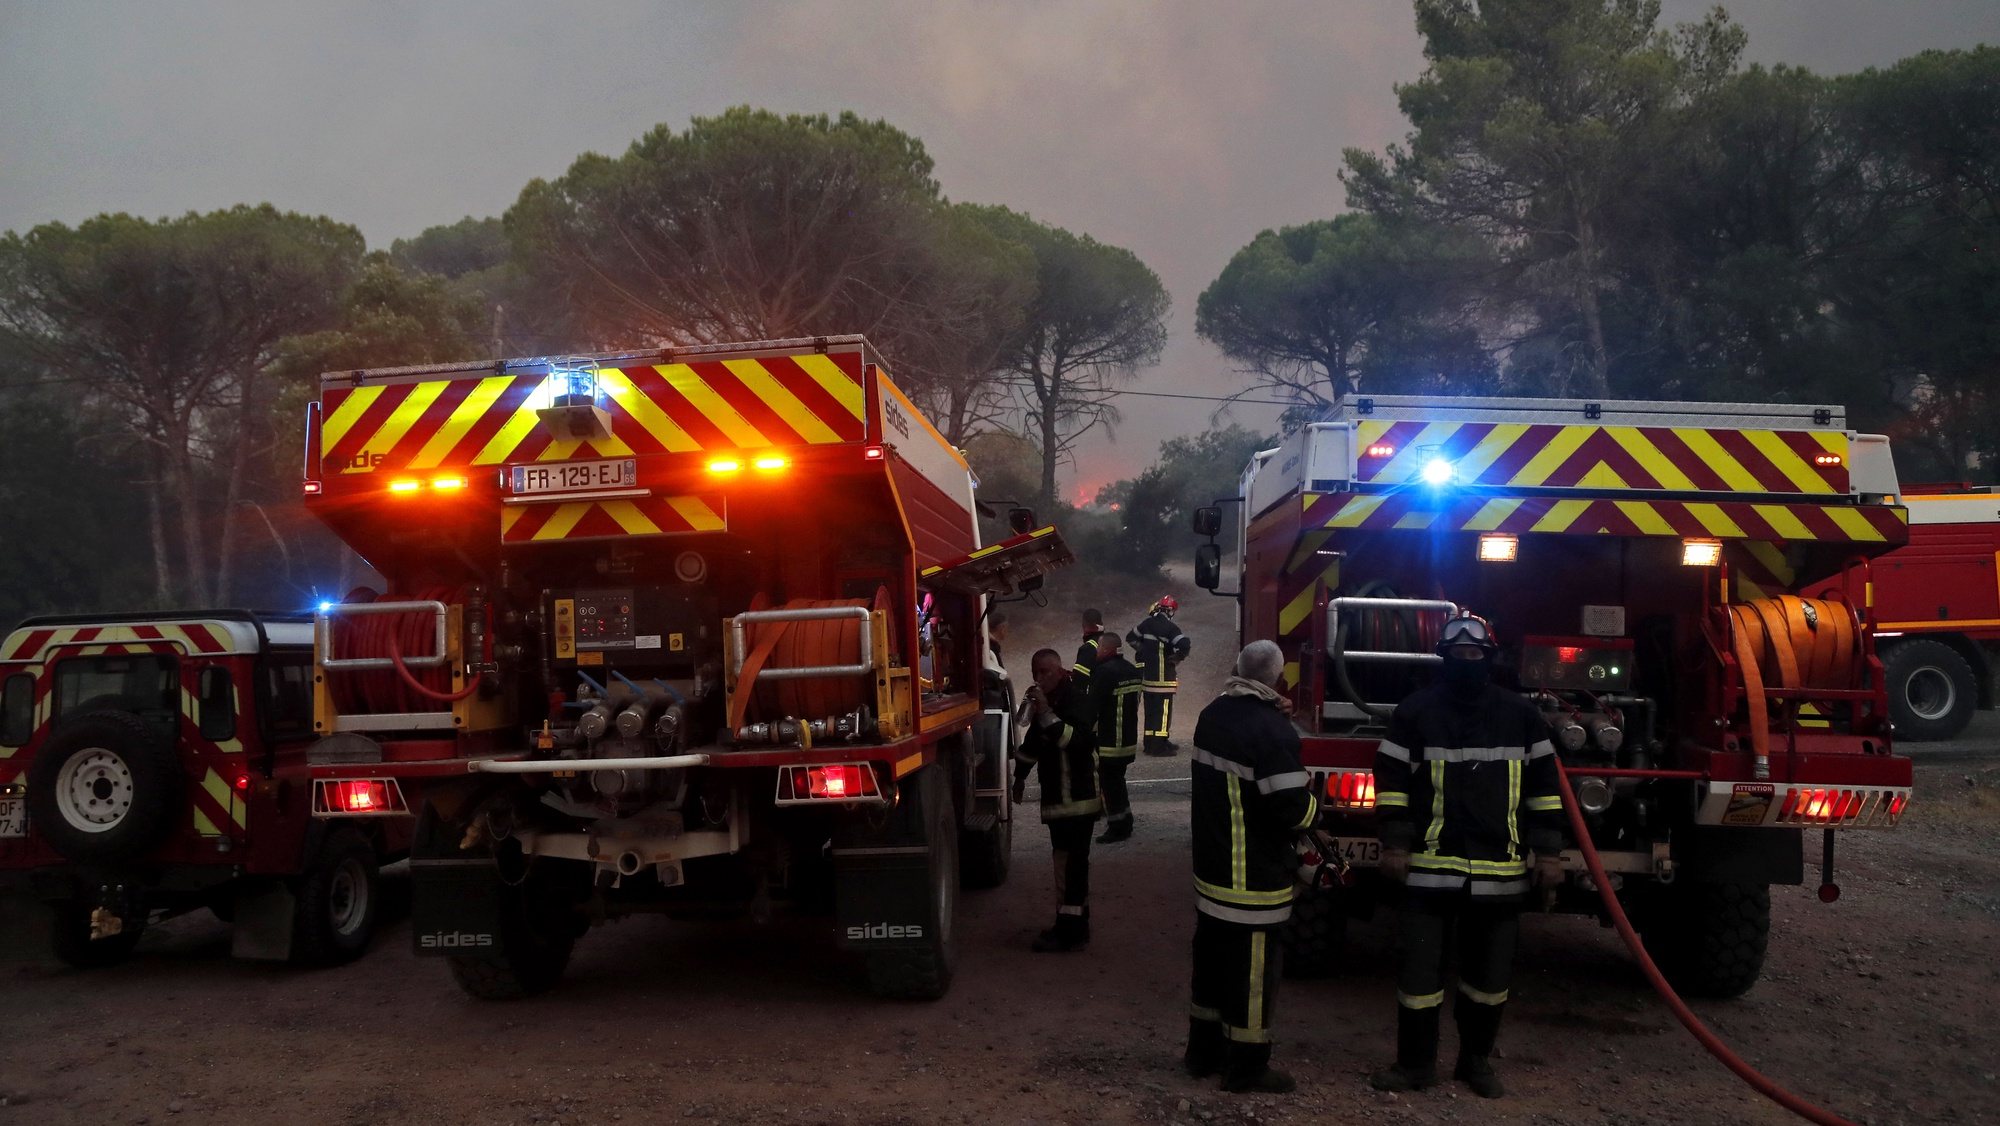 epa09418273 French firefighters try to extinguish a forest fire around Cannet des Maures, France, 17 August 2021. Firefighters are battling wildfires and thousands of residents are evacuated in the area near St. Tropez.  EPA/GUILLAUME HORCAJUELO